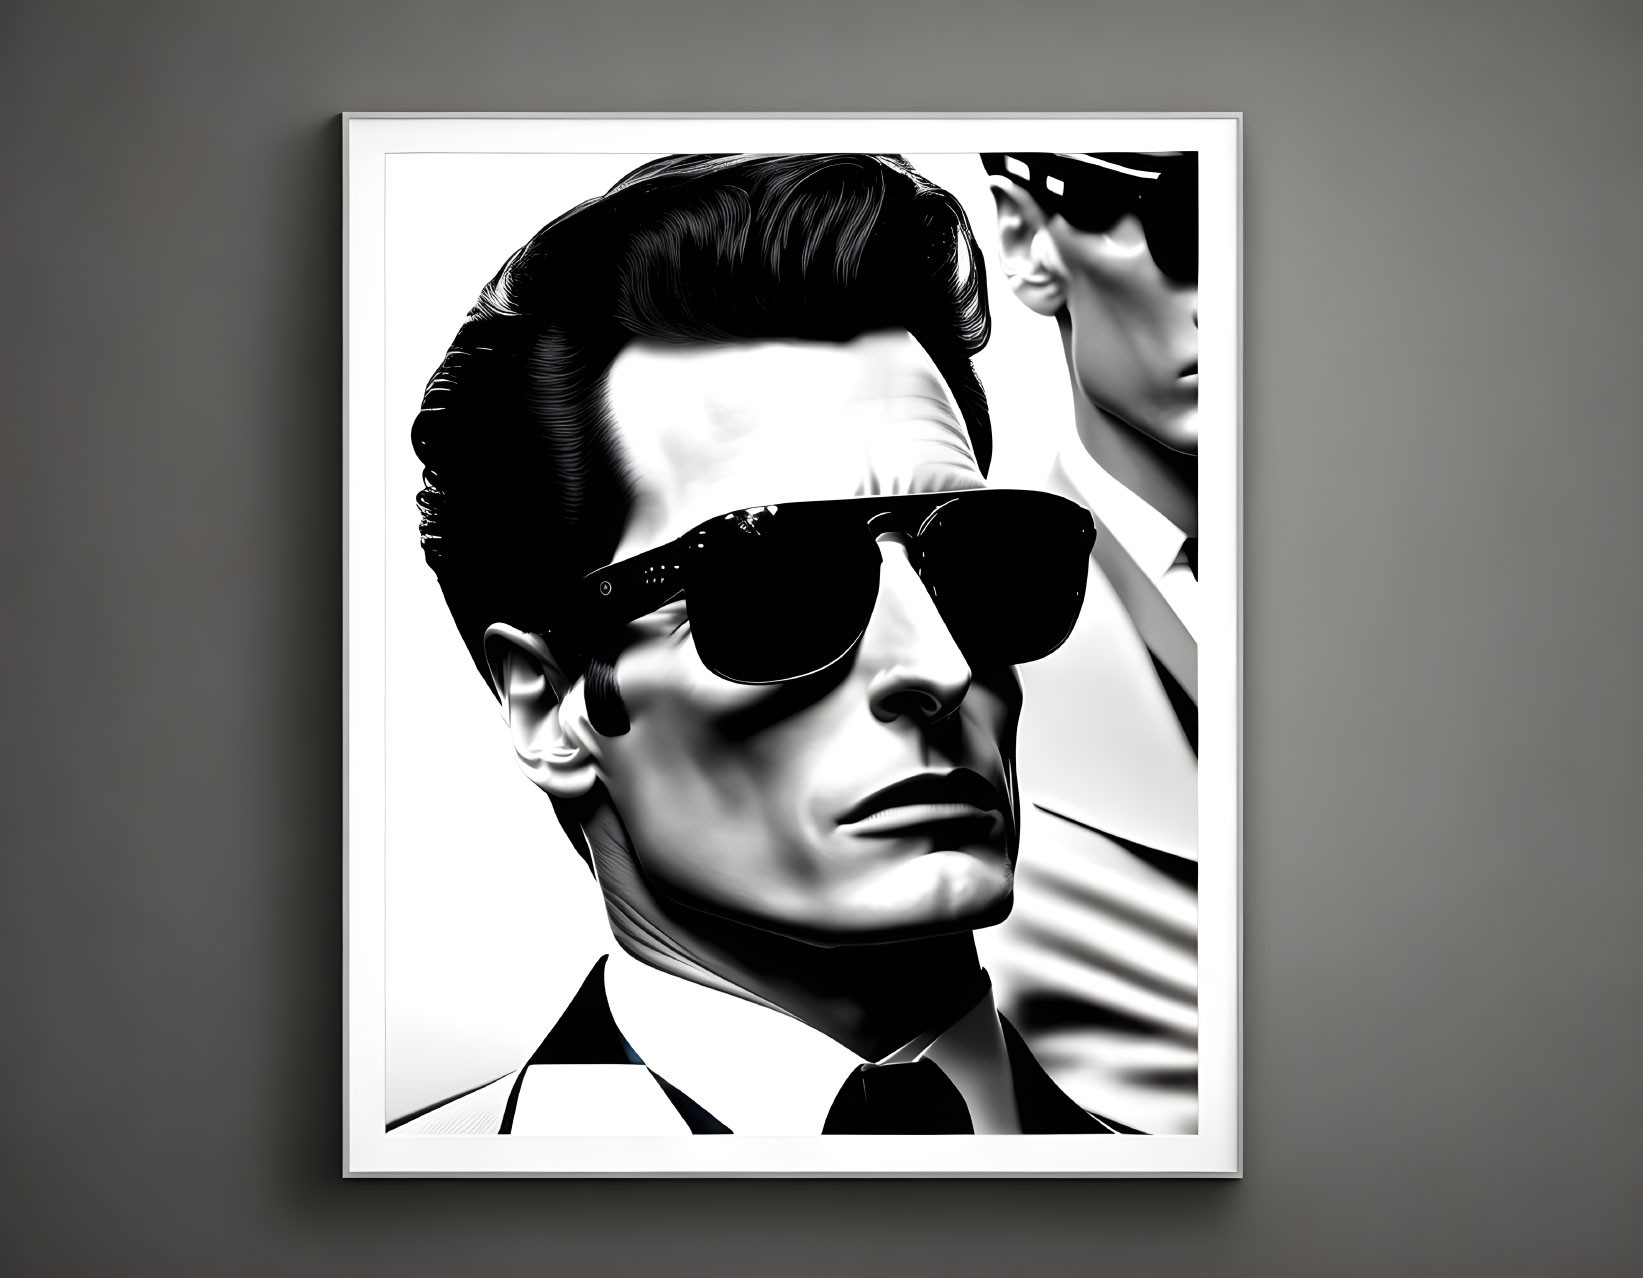 Monochromatic illustration of a man in sunglasses with shadowy figures in background